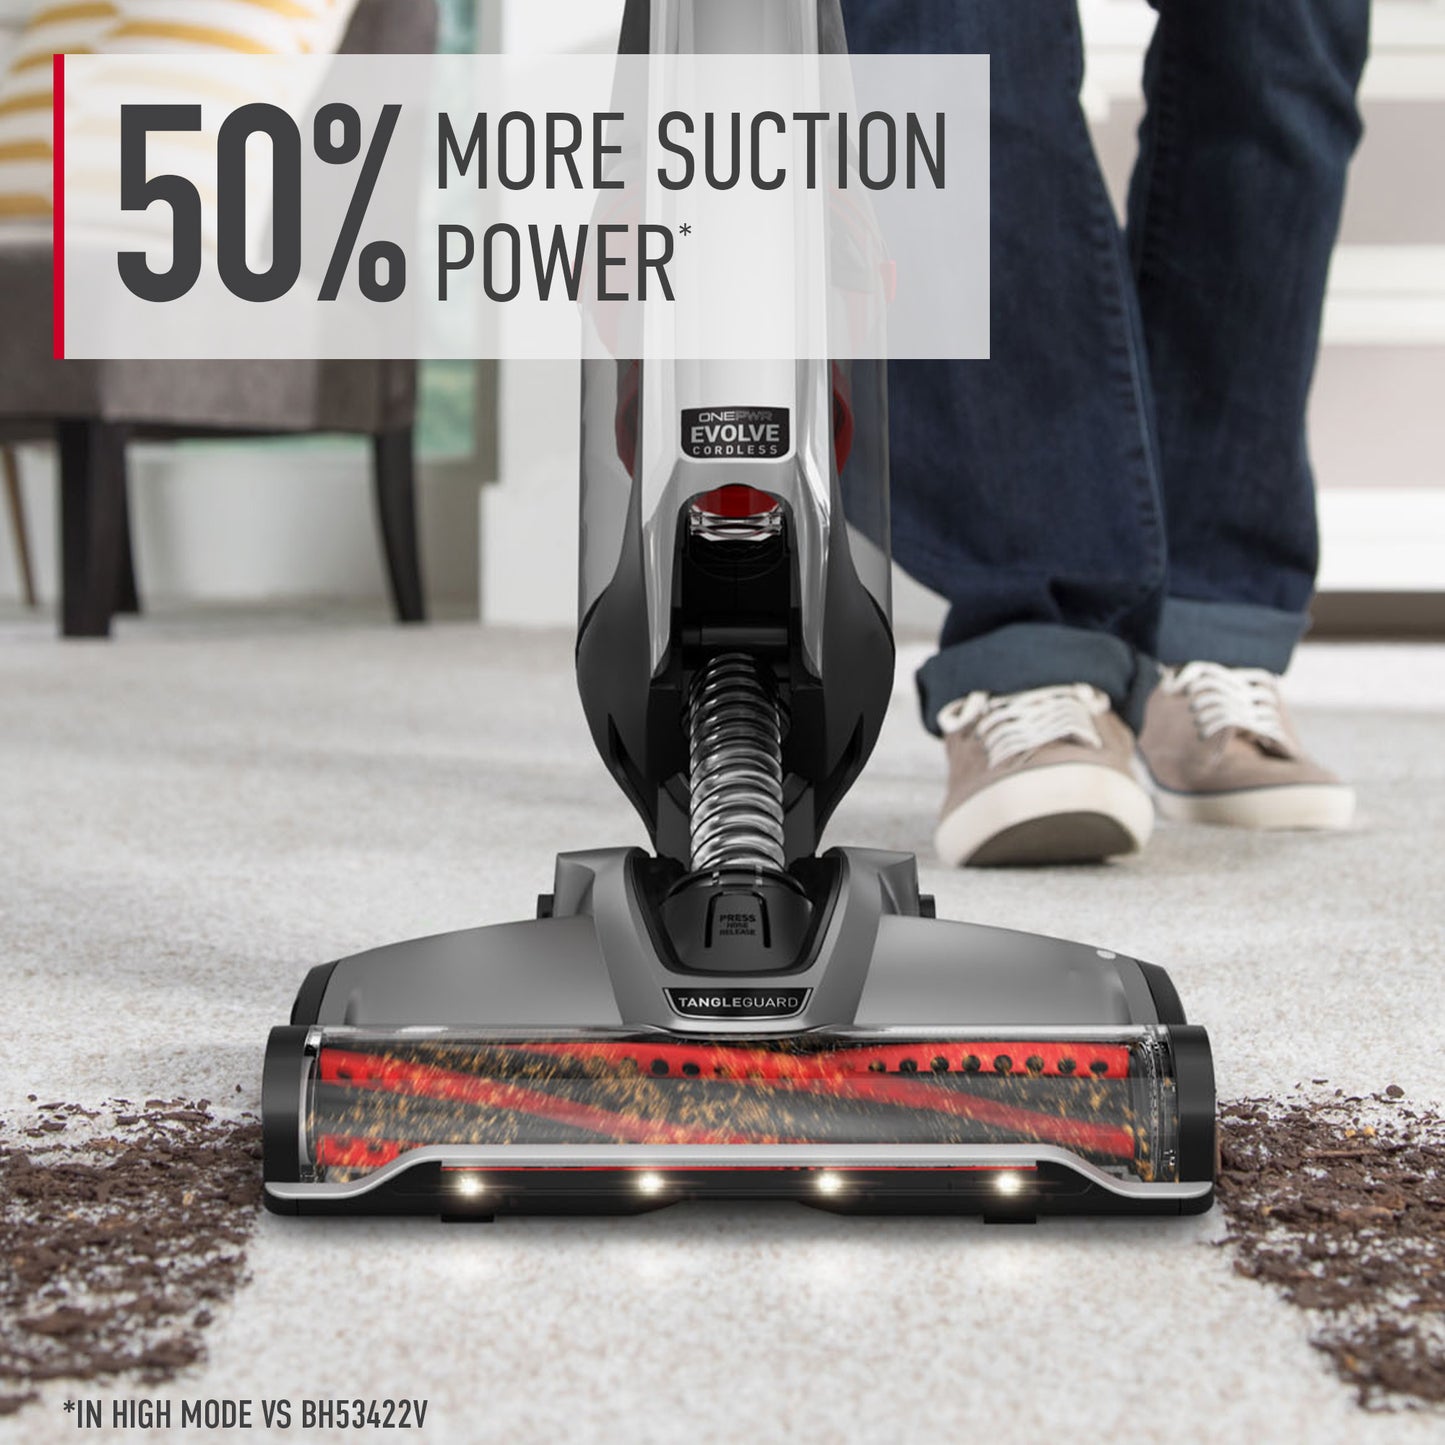 Close up of ONEPWR evolve pet elite cordless upright vacuum thoroughly cleaning dirt and debris out of white carpet displaying 50% more suction power